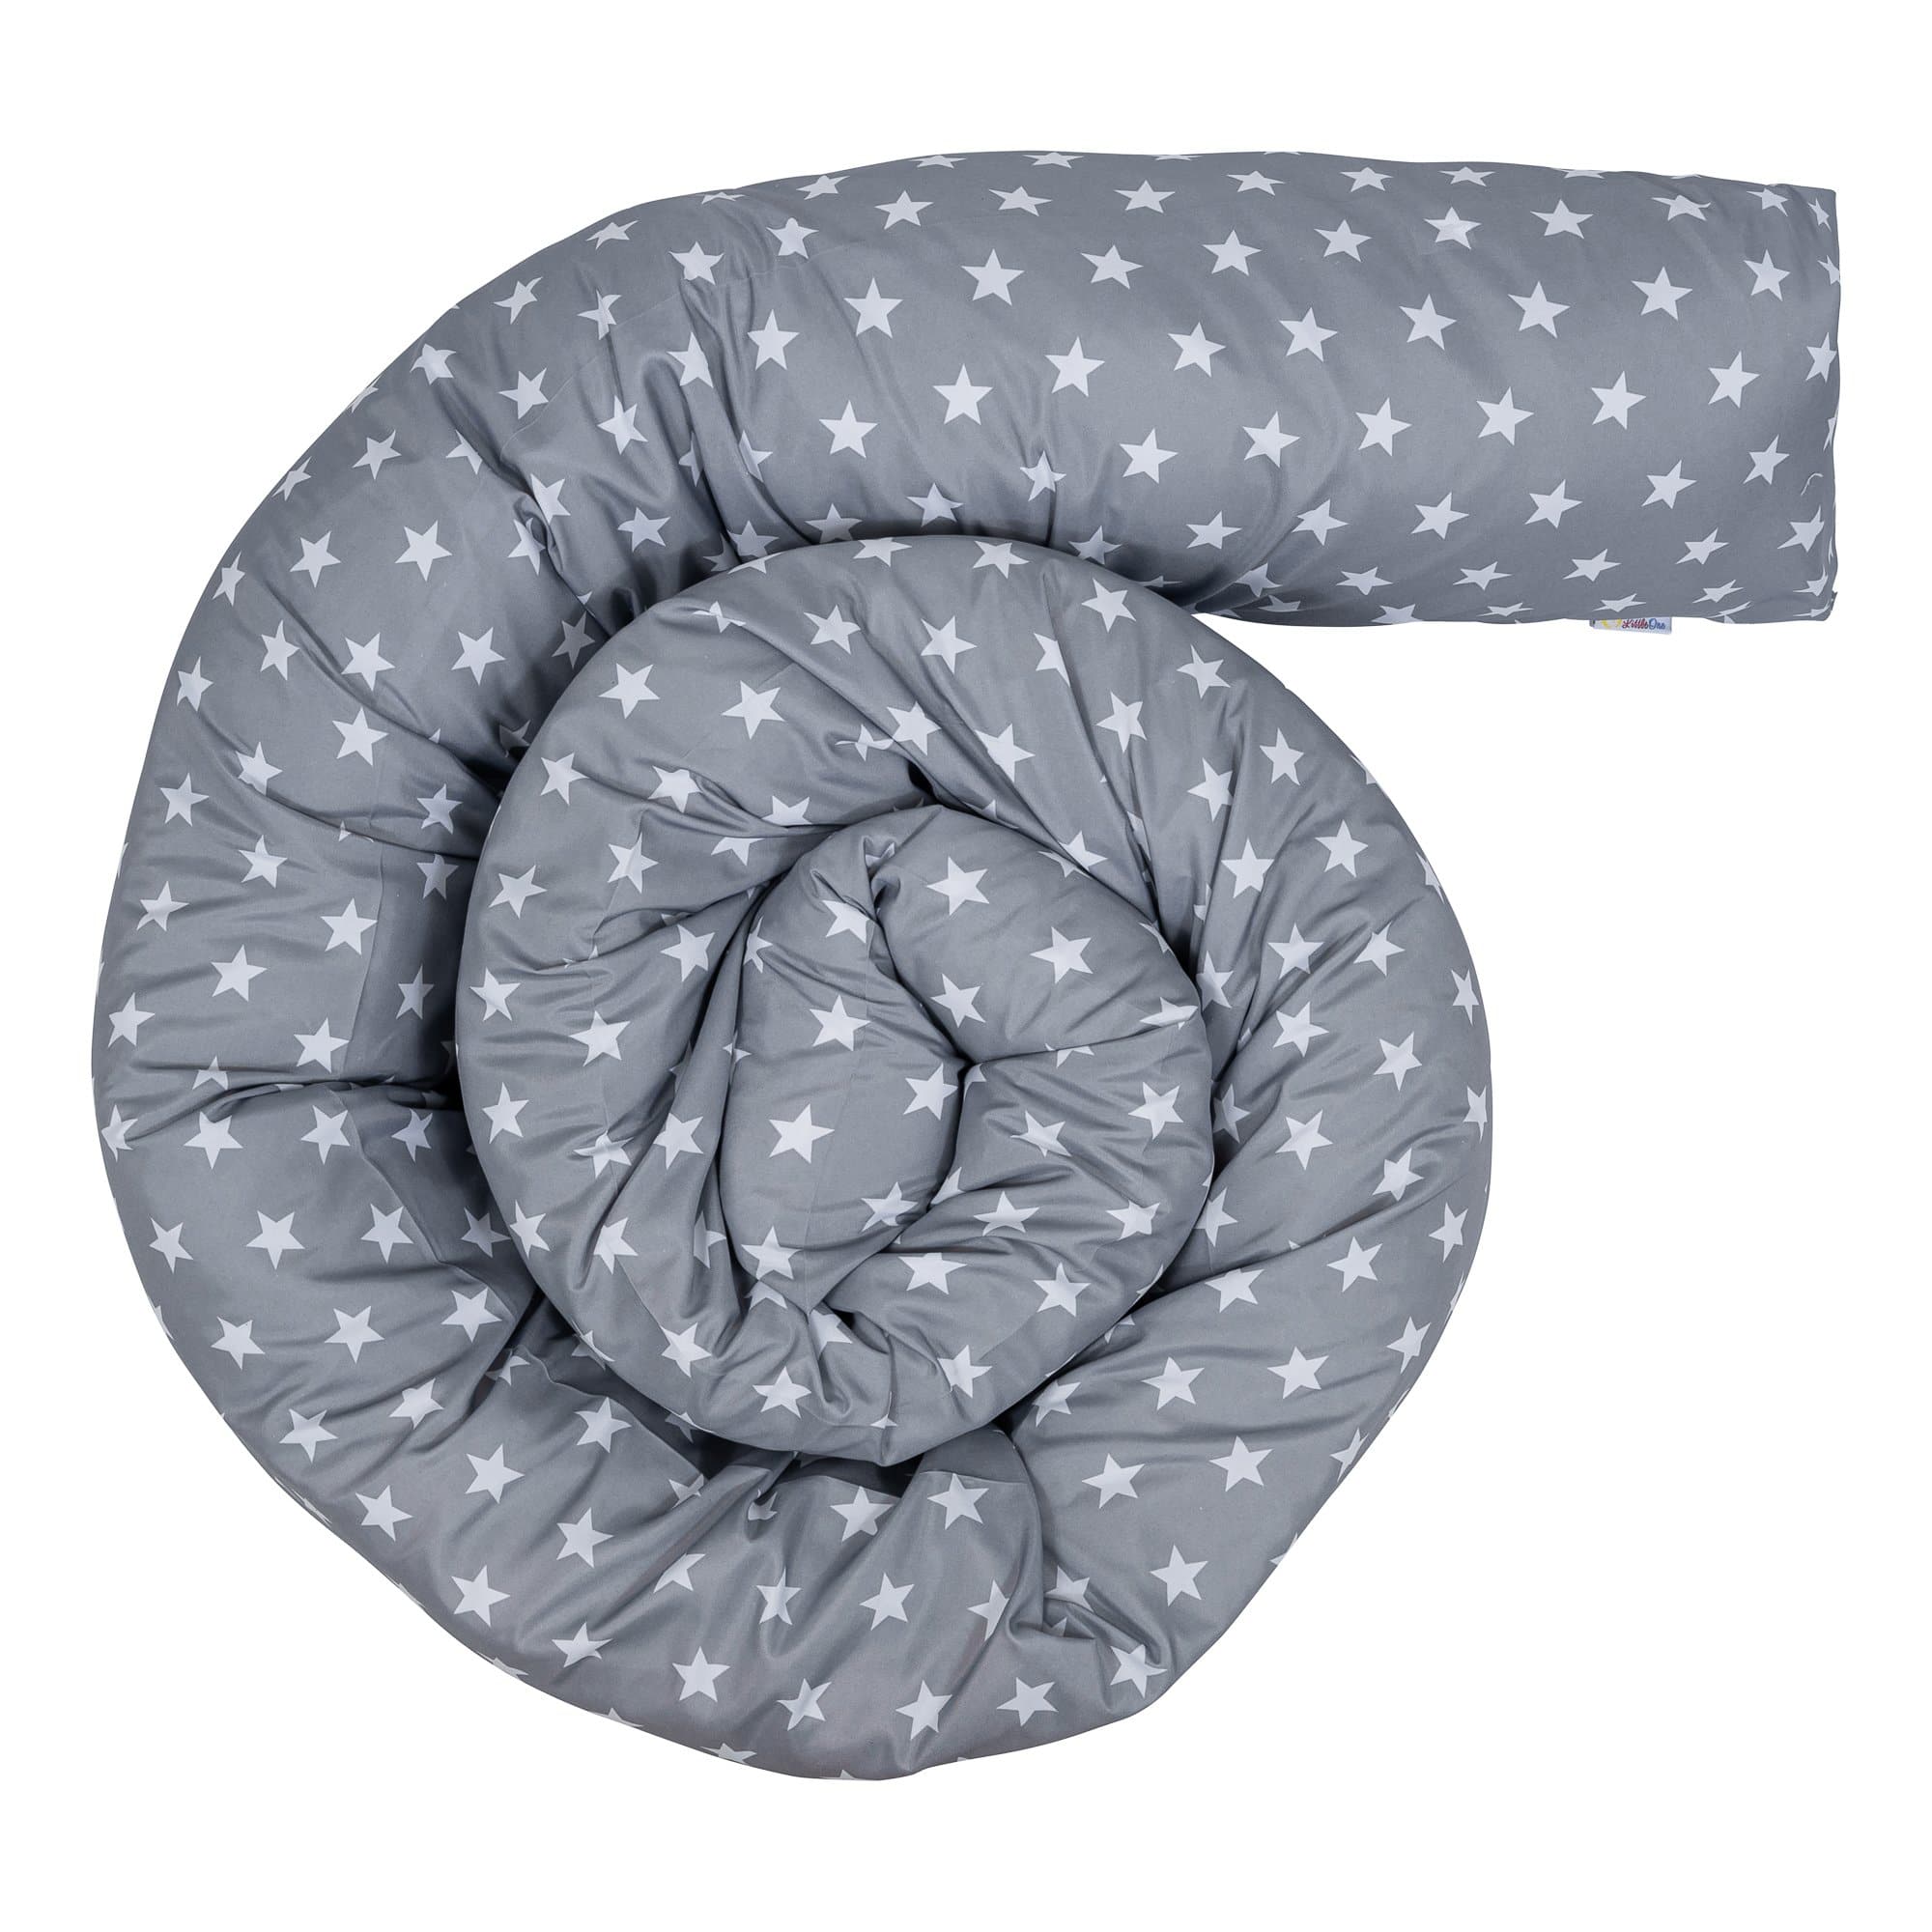 9 Ft Maternity Cover - Grey with White Star - For Your Little One